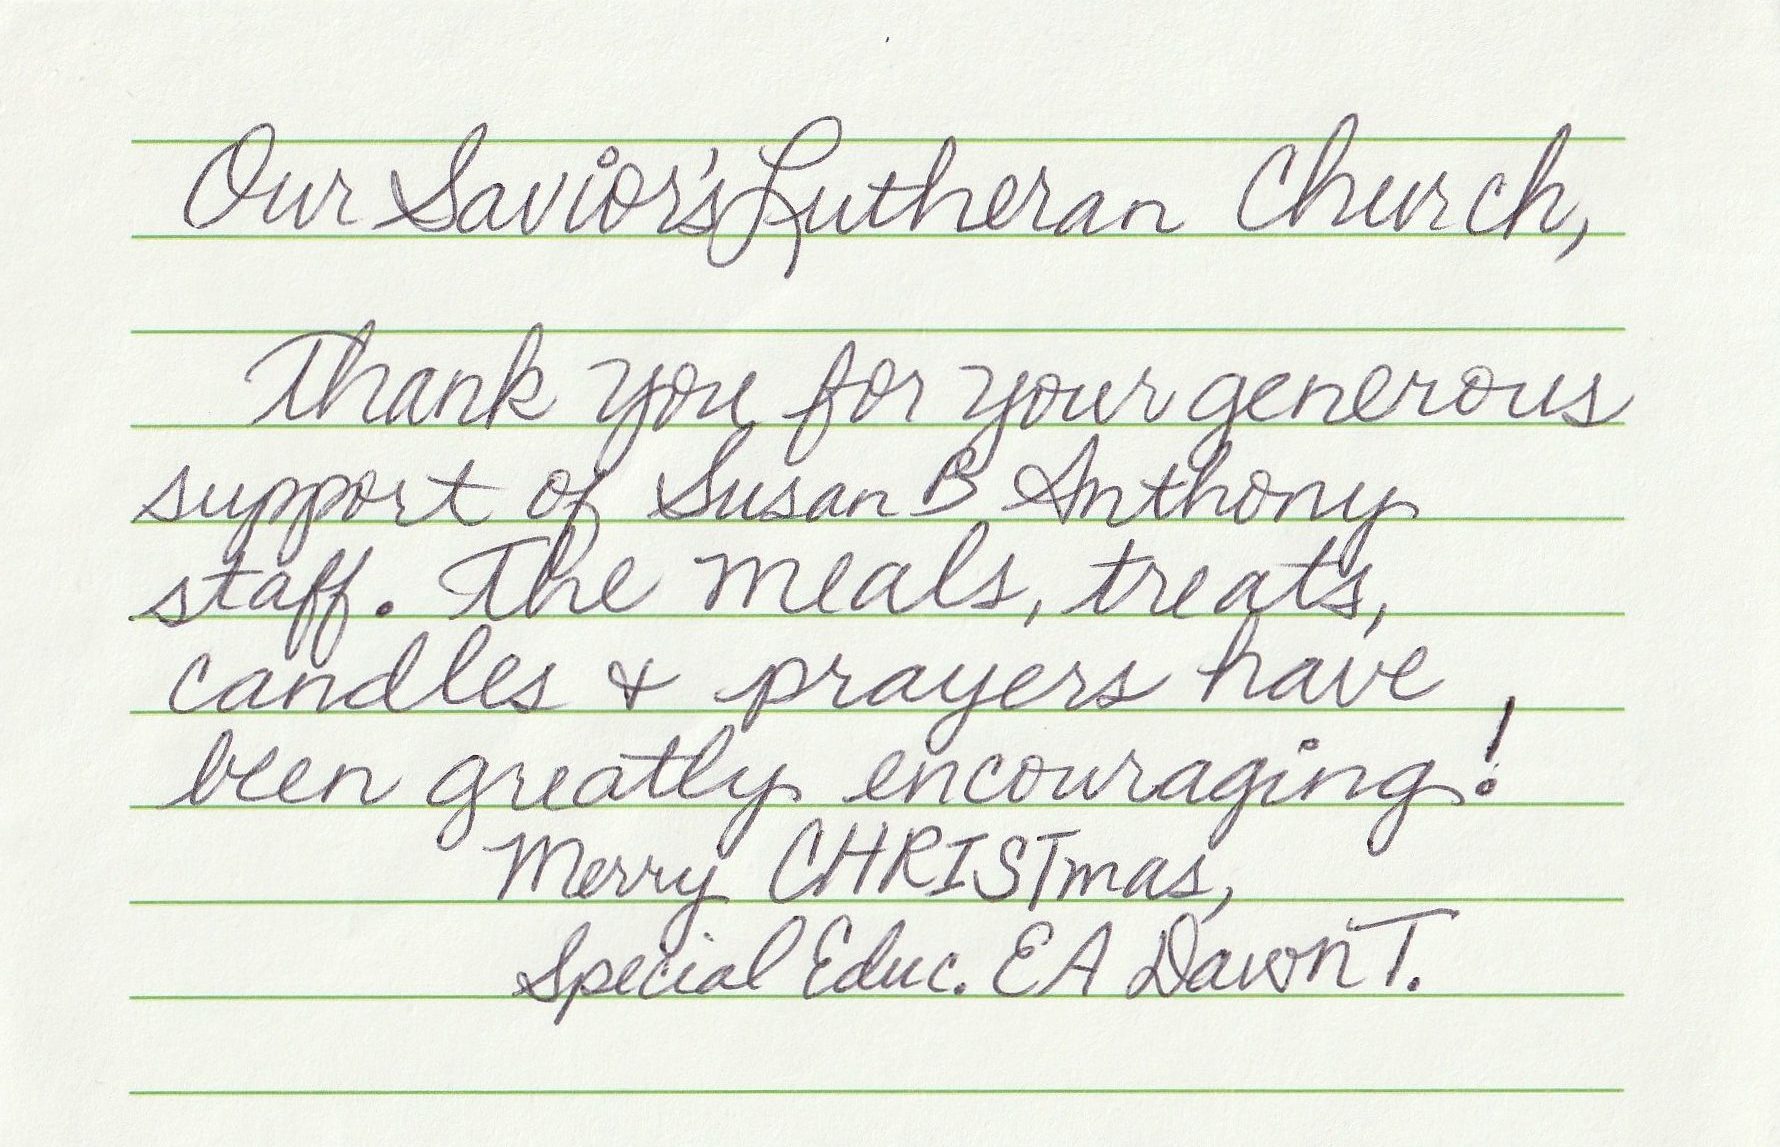 Thank-You Note from Susan B Anthony Staff